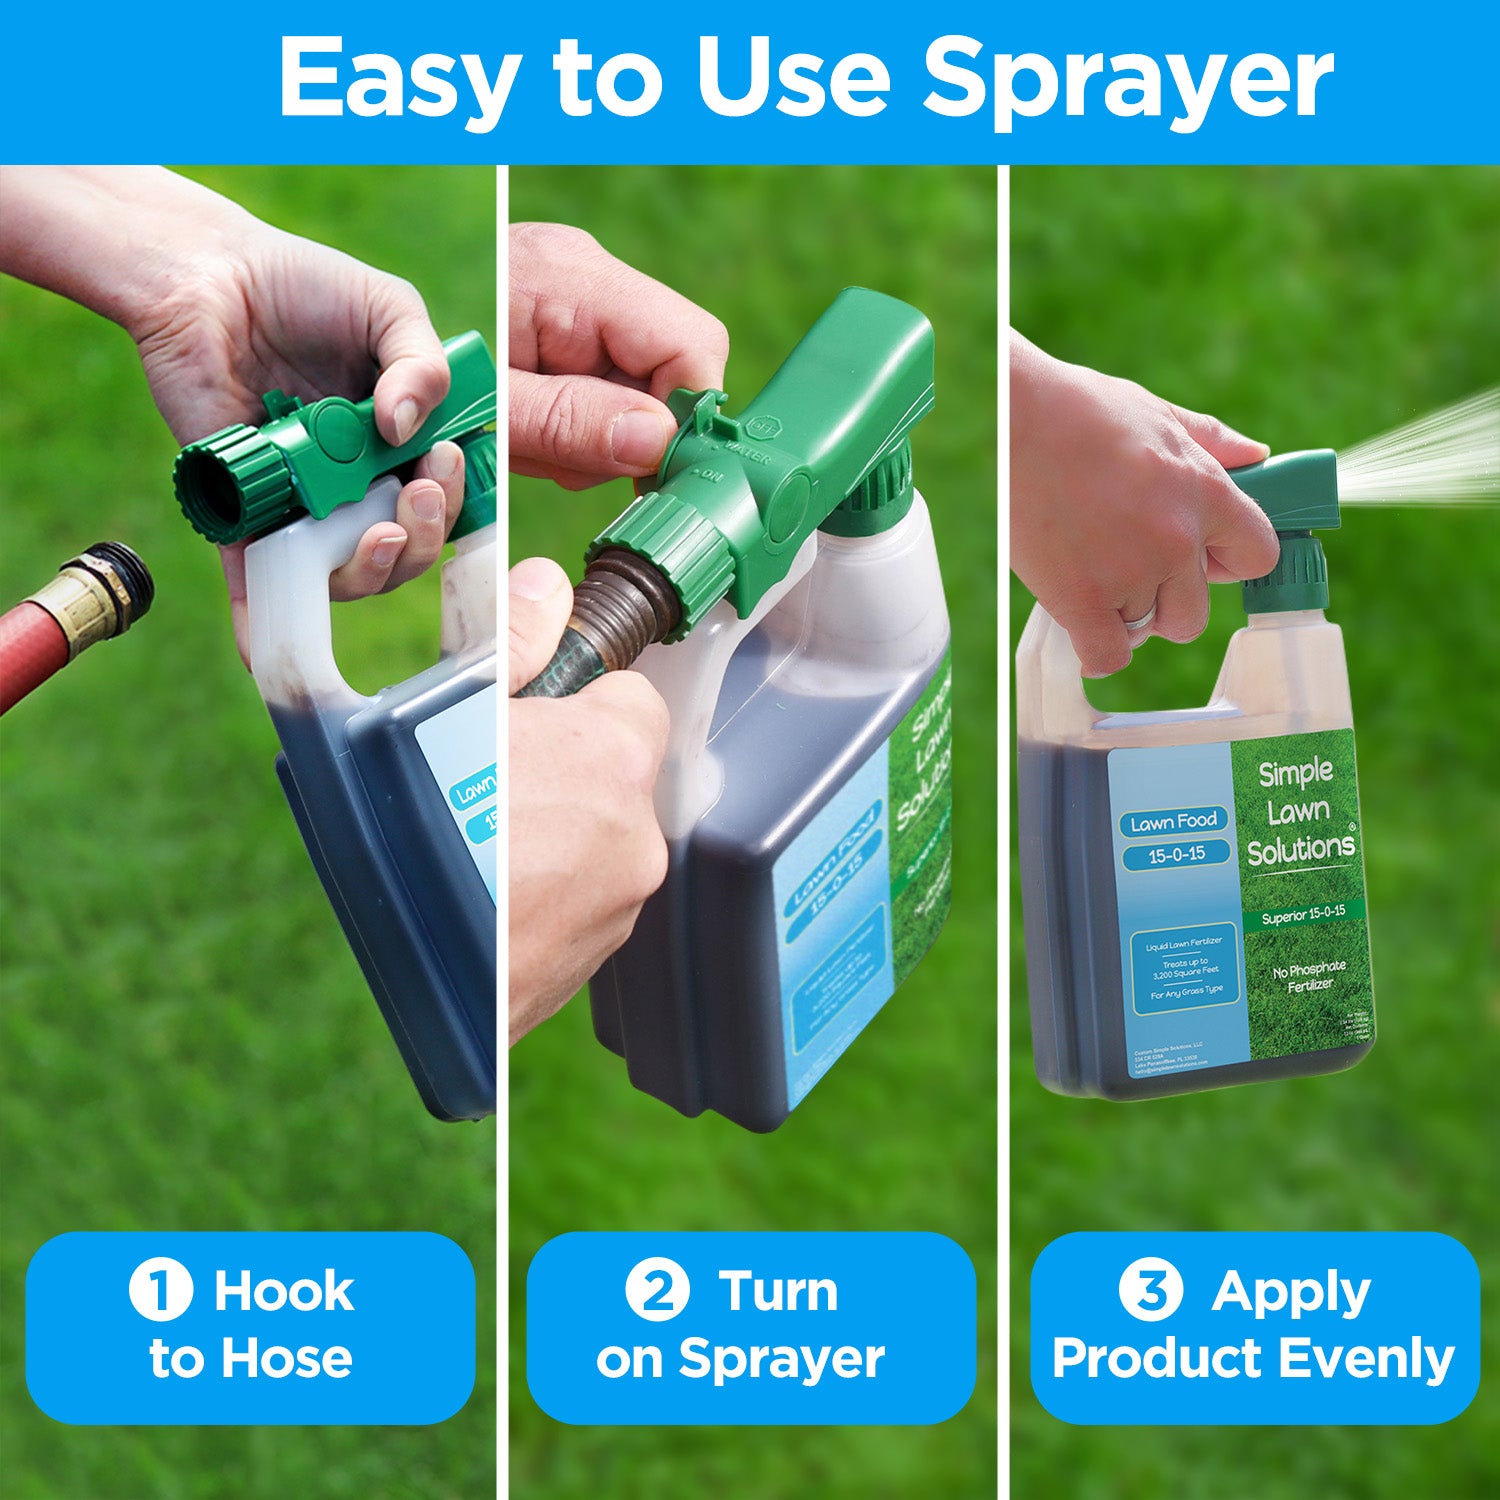 hook fertilizer to hose, turn on sprayer dial, apply product to lawn